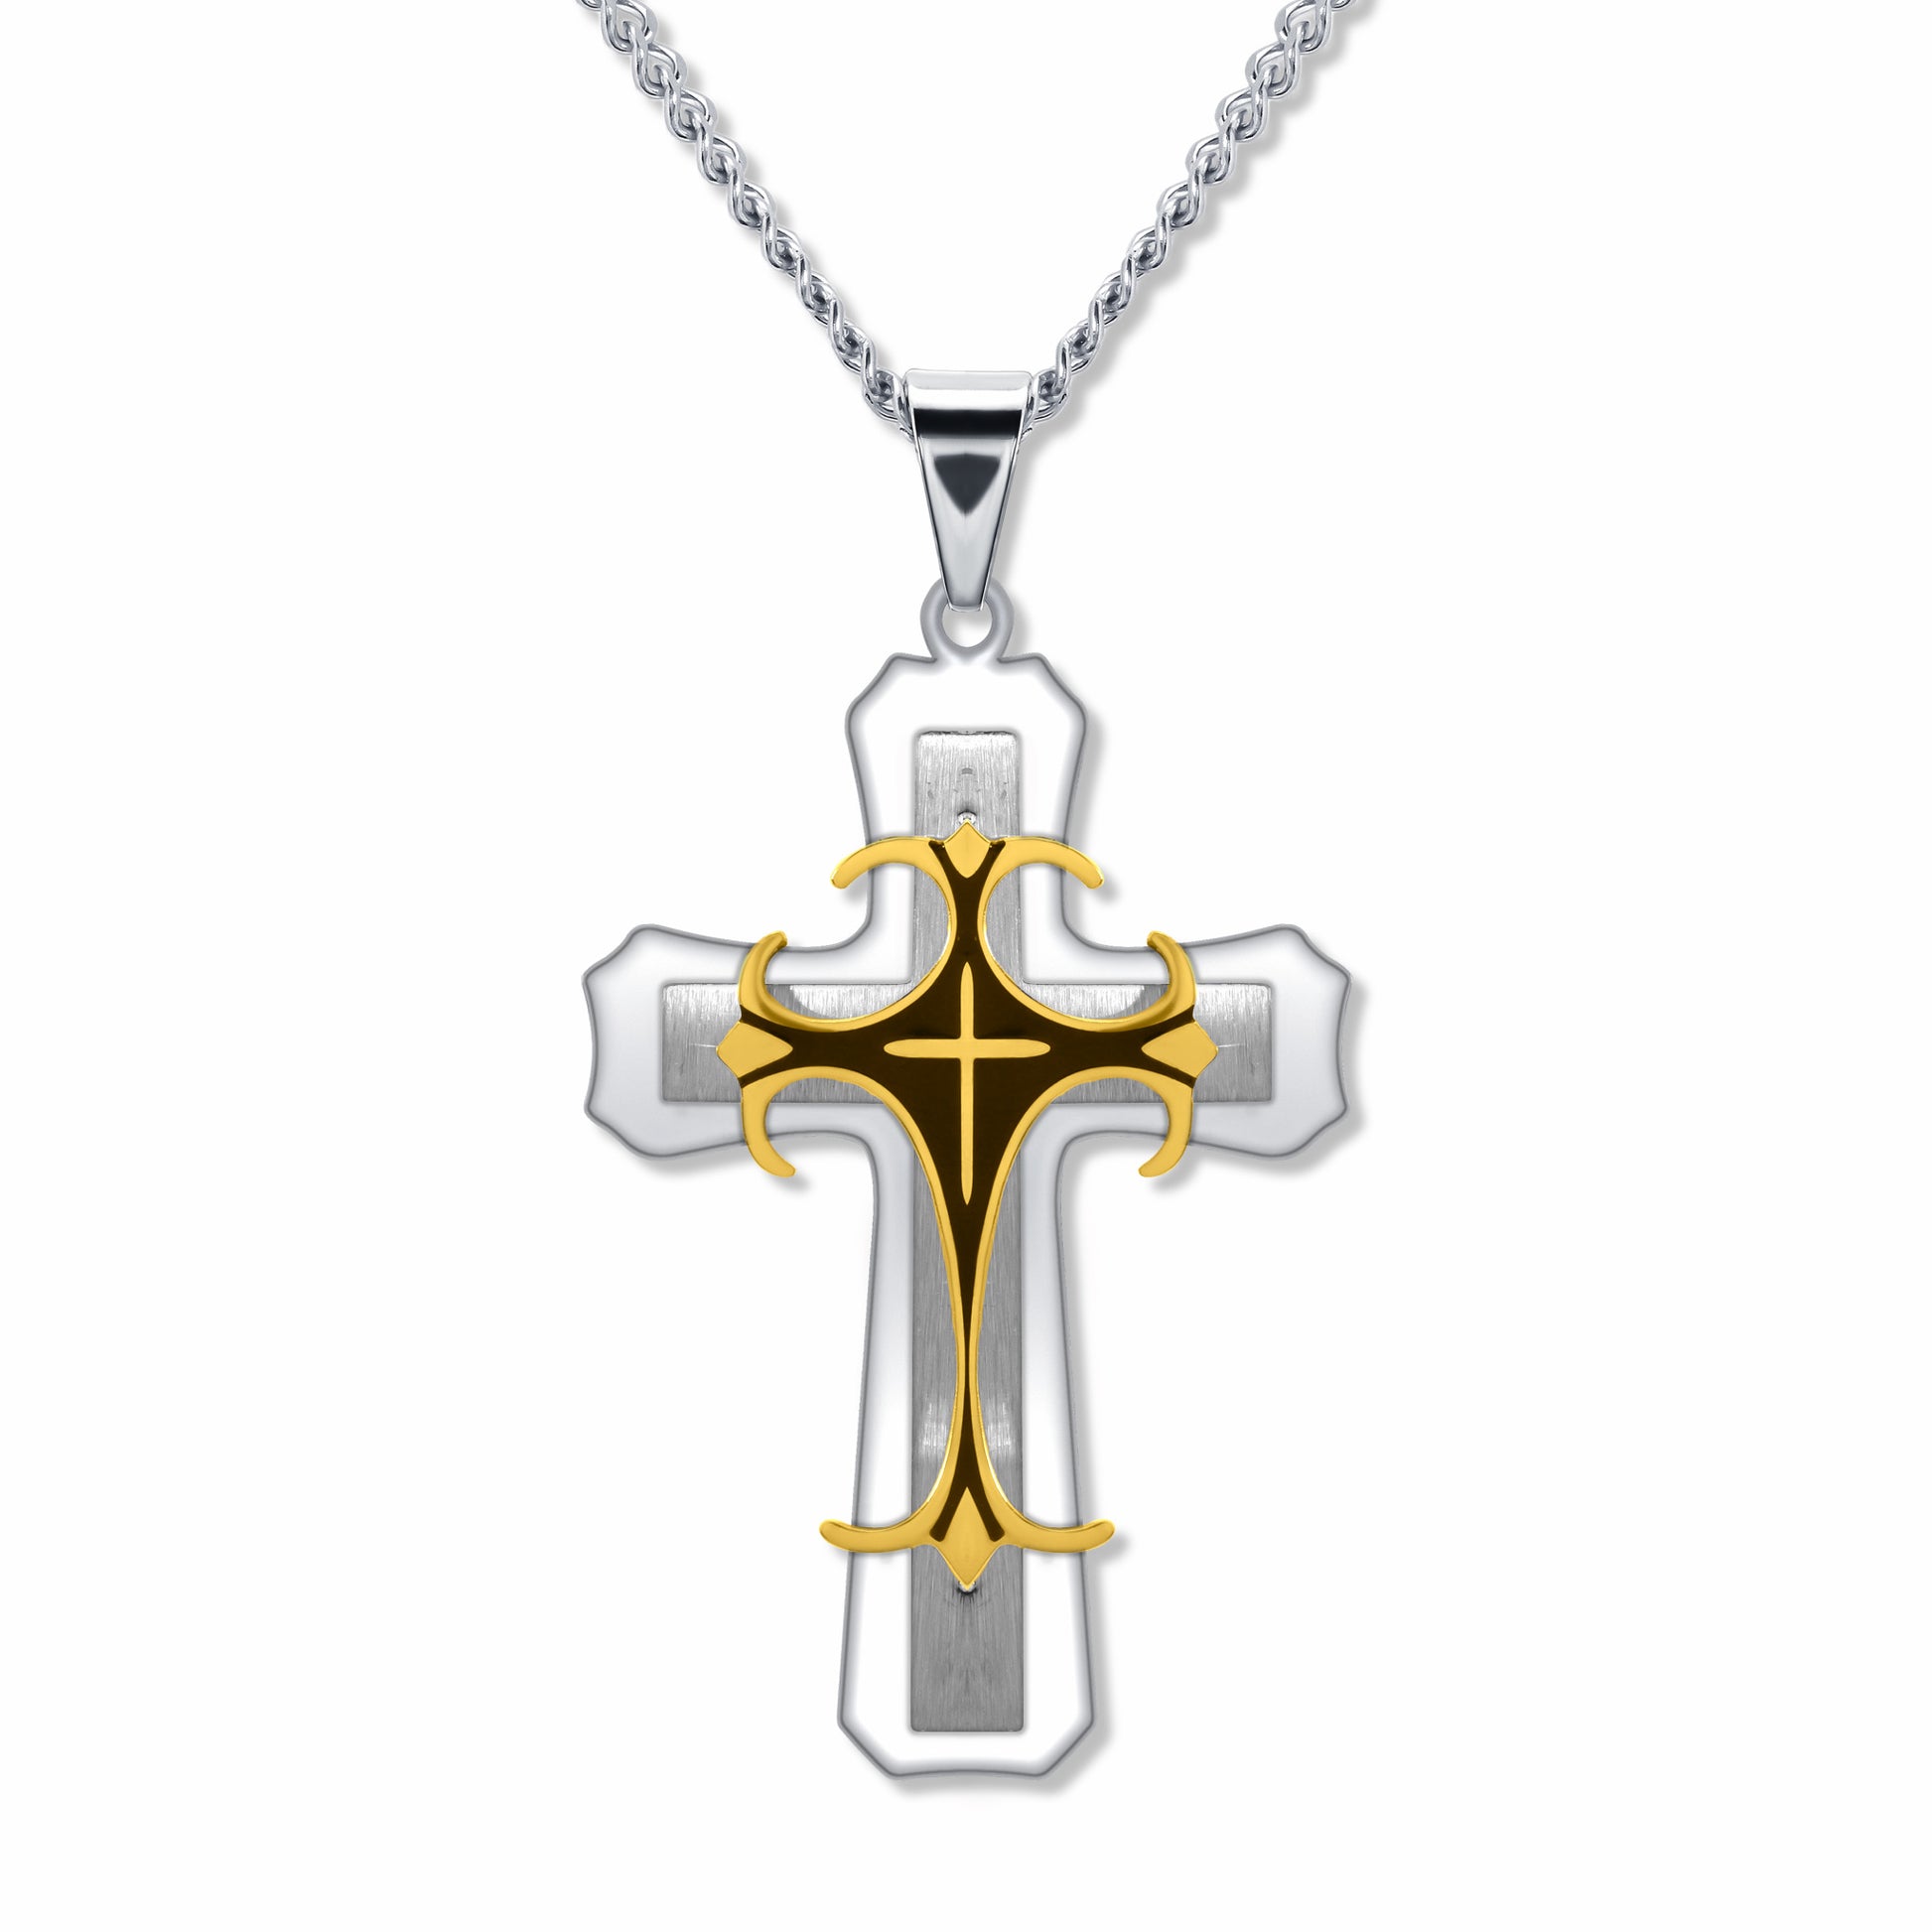 Trinity Cross Gold Pendant with Micro Cuban Silver Chain 3mm on white background